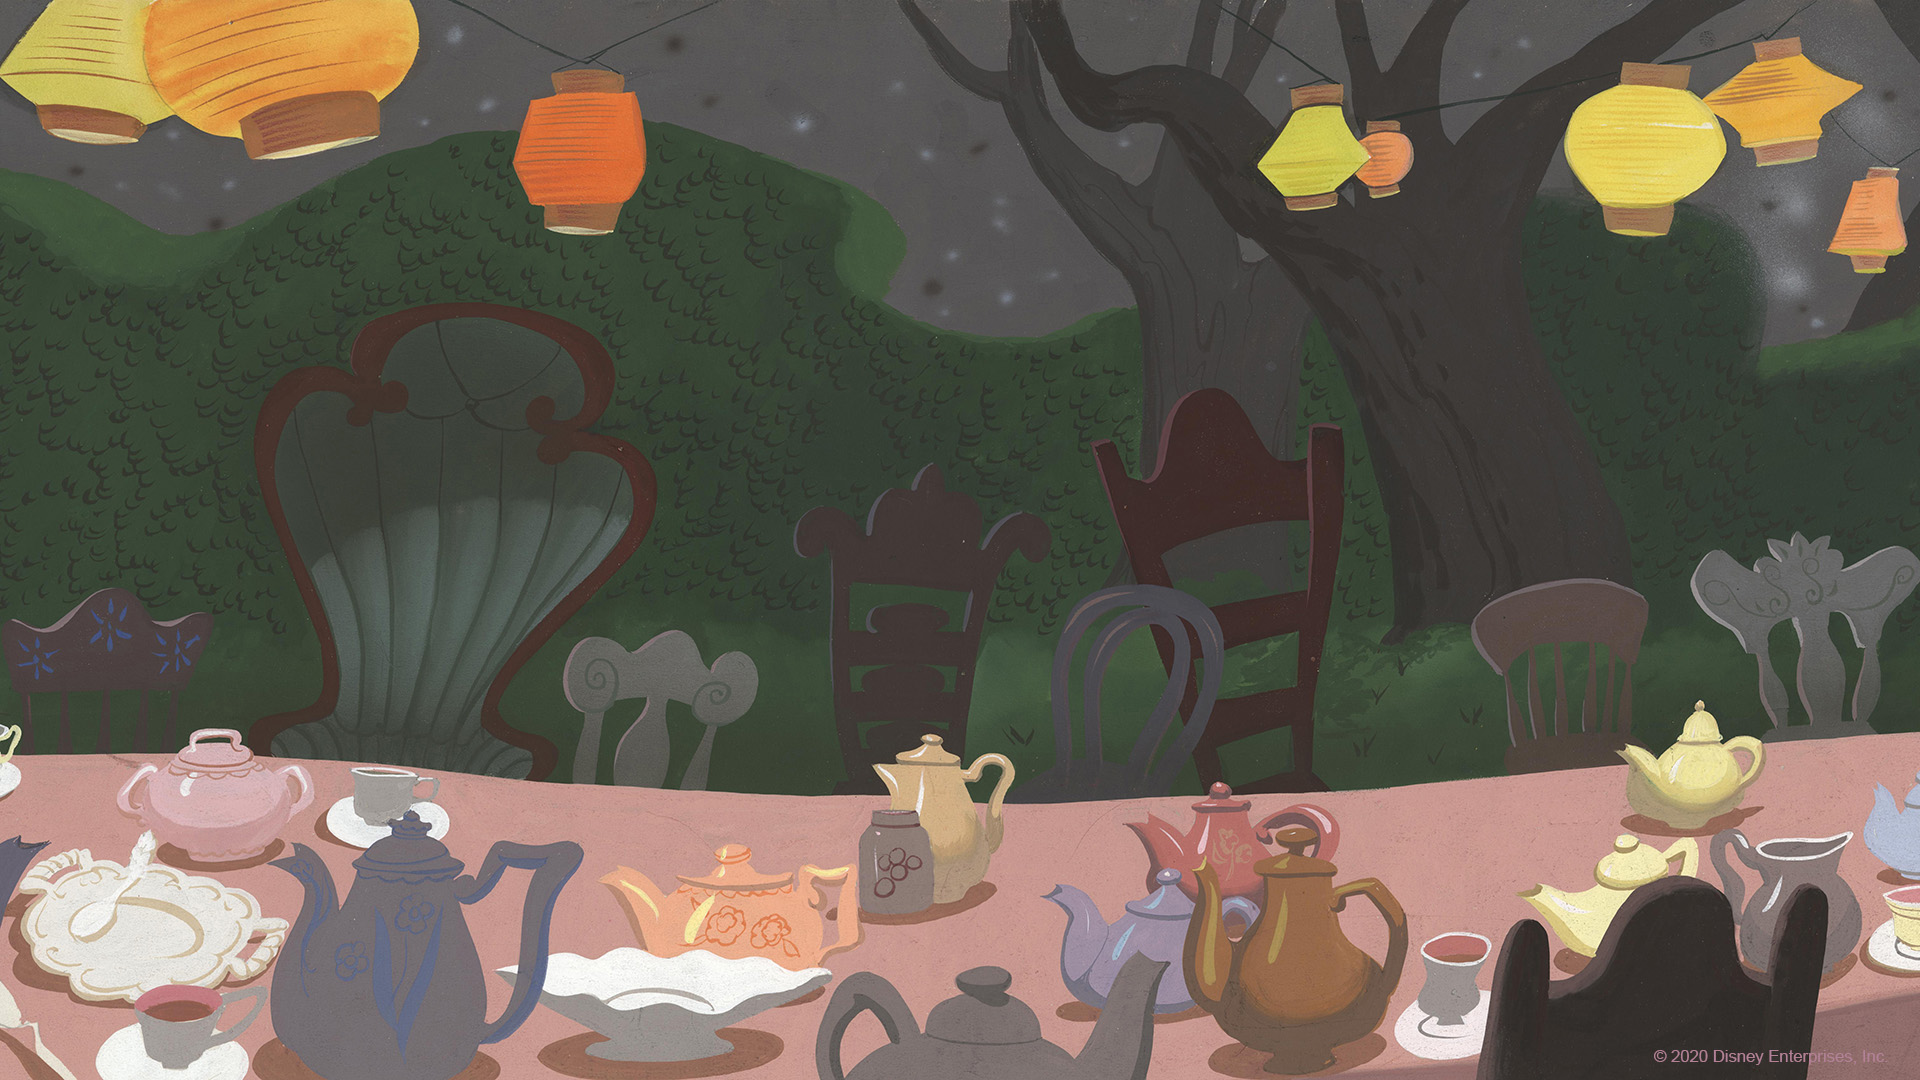 Add A Little Magic To Your Wfh Zoom Meeting With These New Disney Backgrounds Allears Net